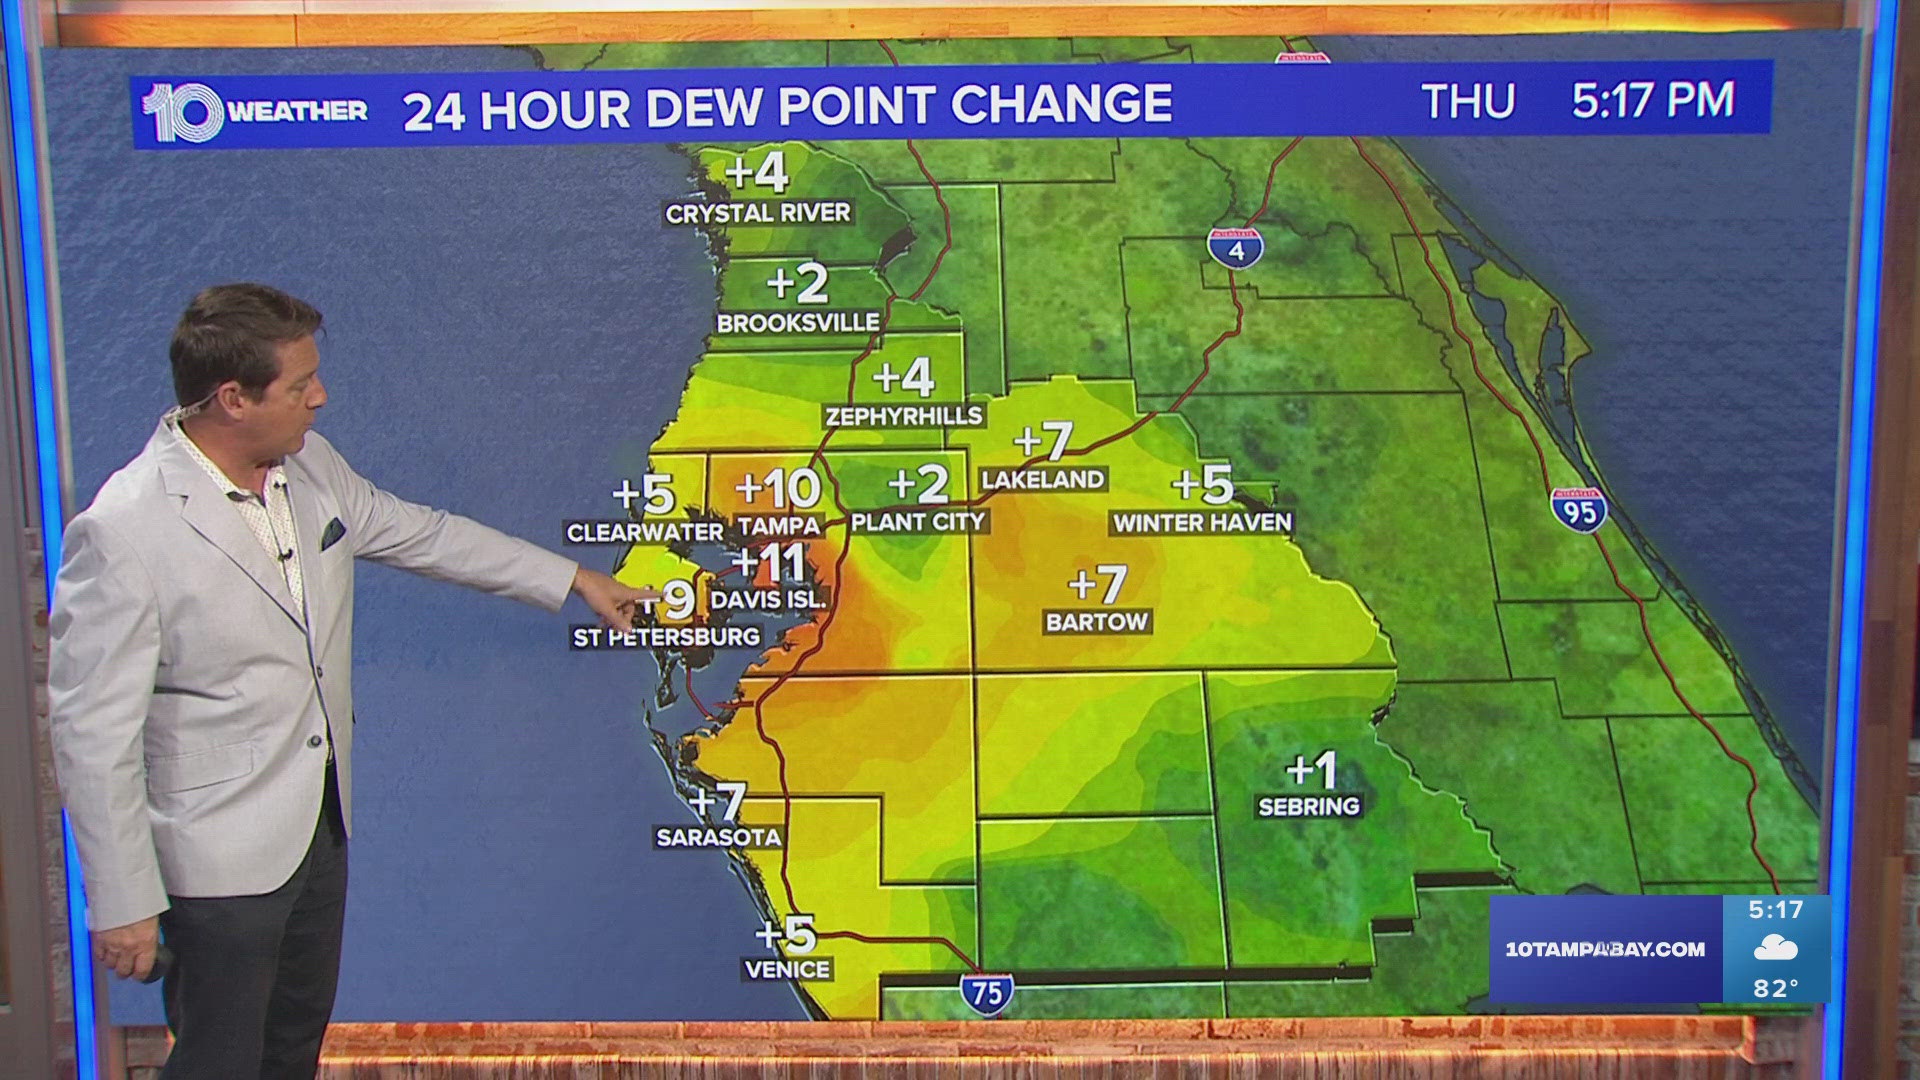 10 Tampa Bay Chief Meteorologist Bobby Deskins shares the latest forecast and weather outlooks.